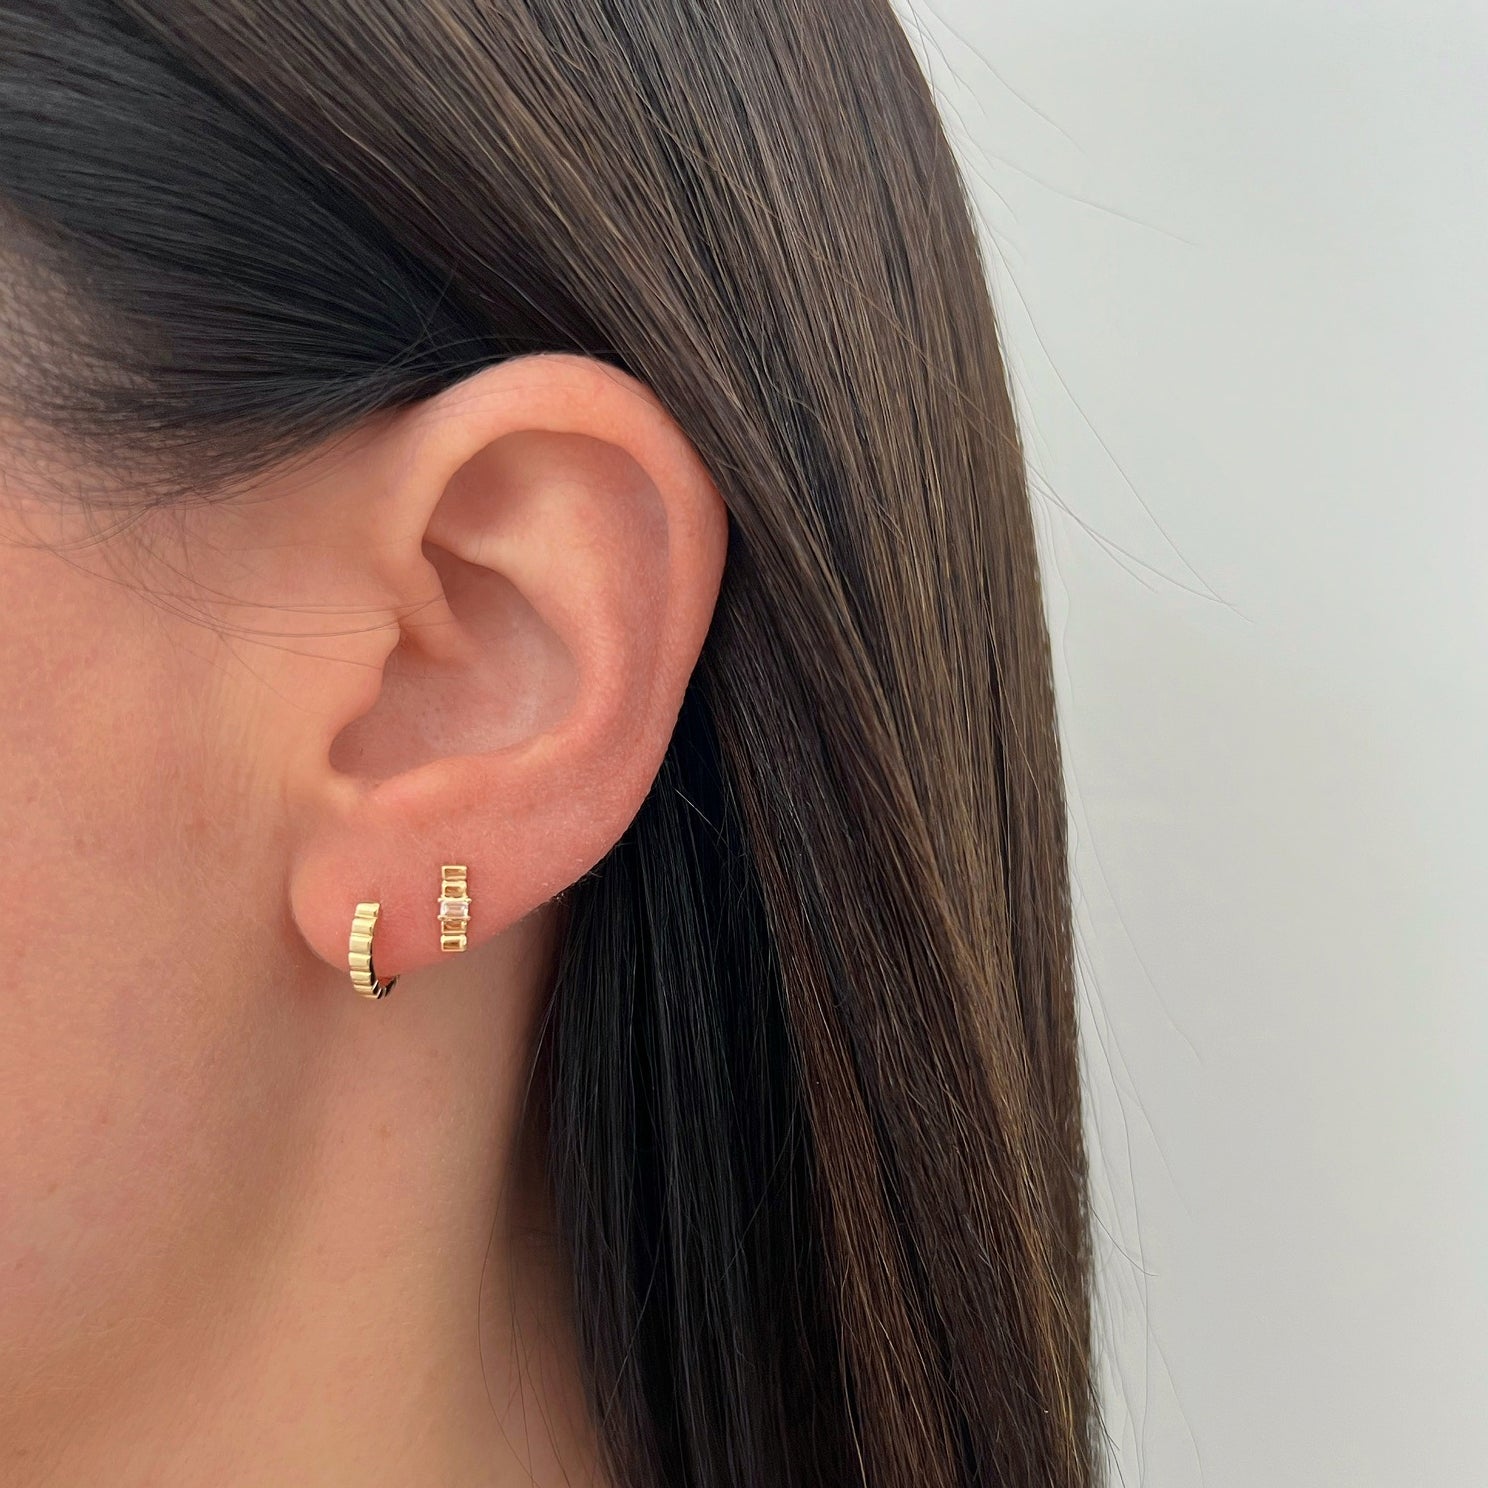 Diamond & Gold Fluted Bar Stud Earring in 14k yellow gold styled on second earring hole on ear lobe of model next to fluted huggie earring